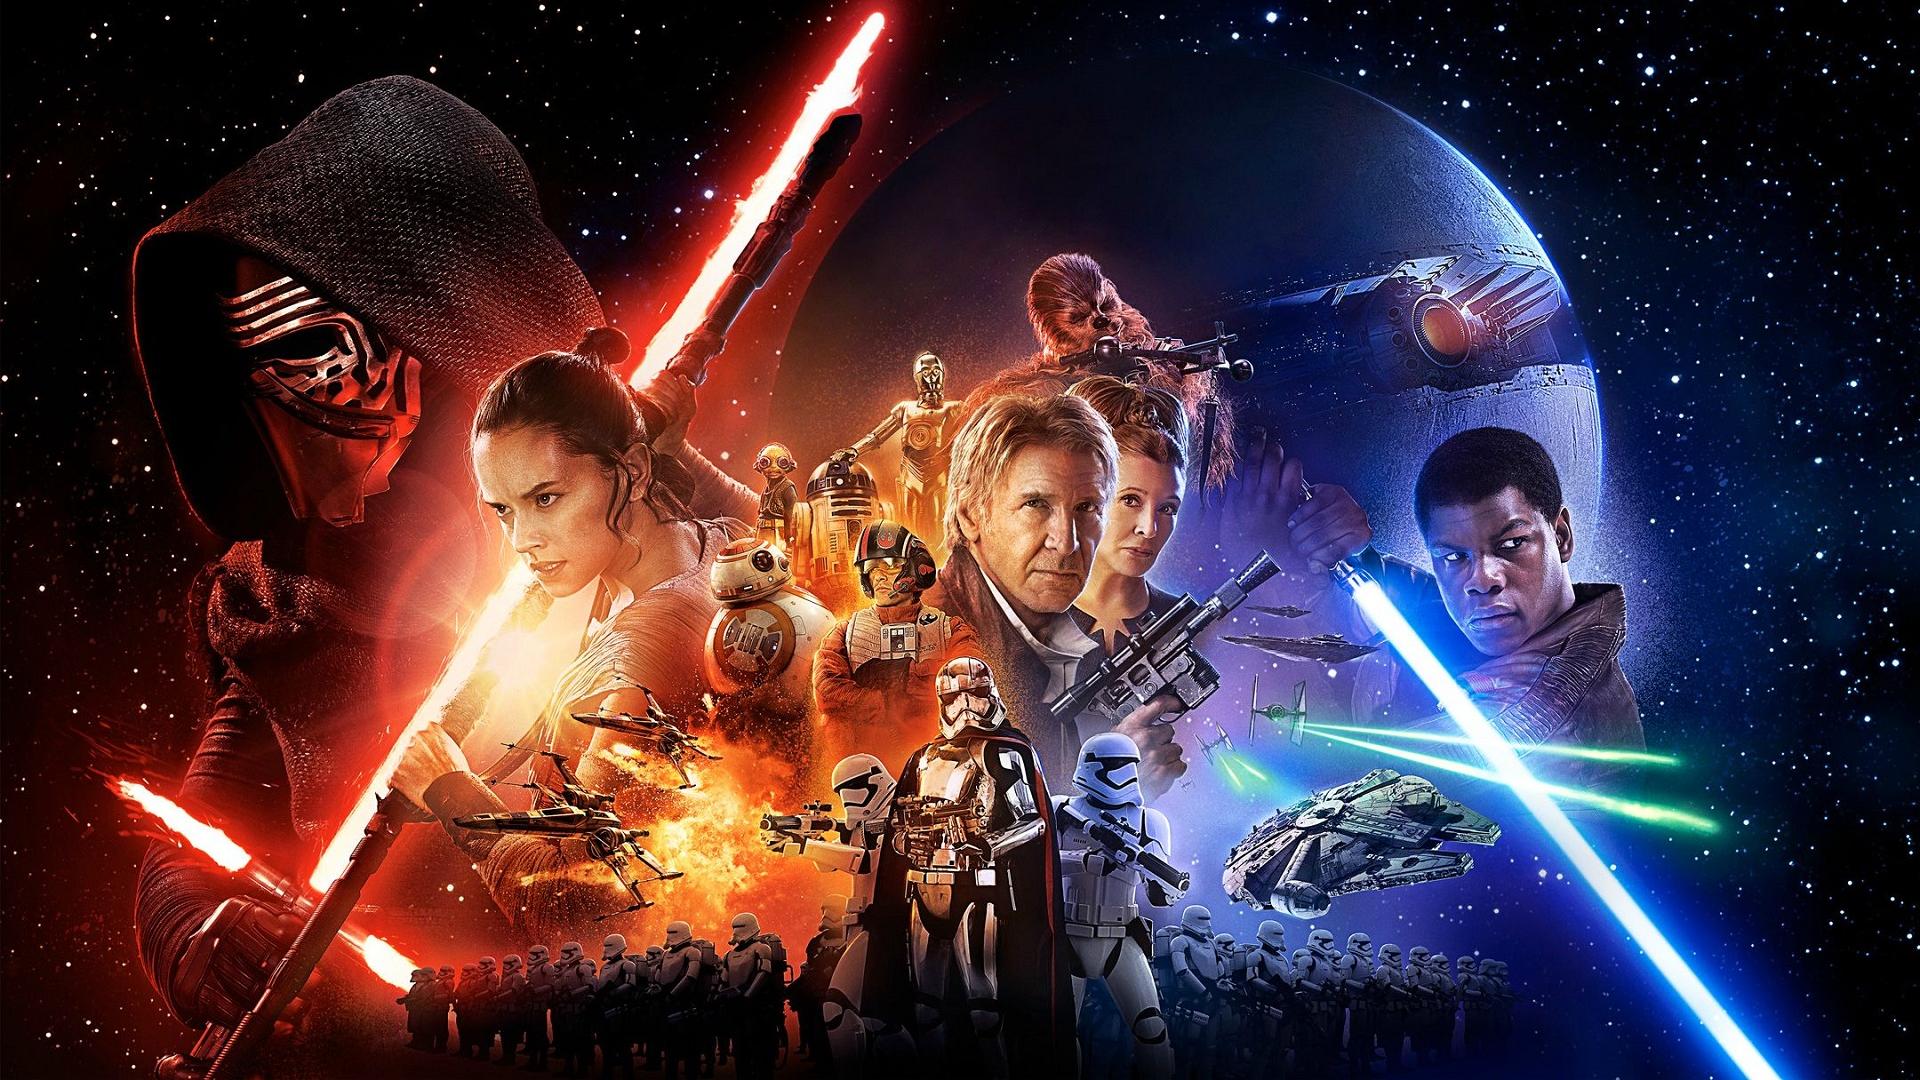 Star Wars The Force Awakens Poster x wallpapers